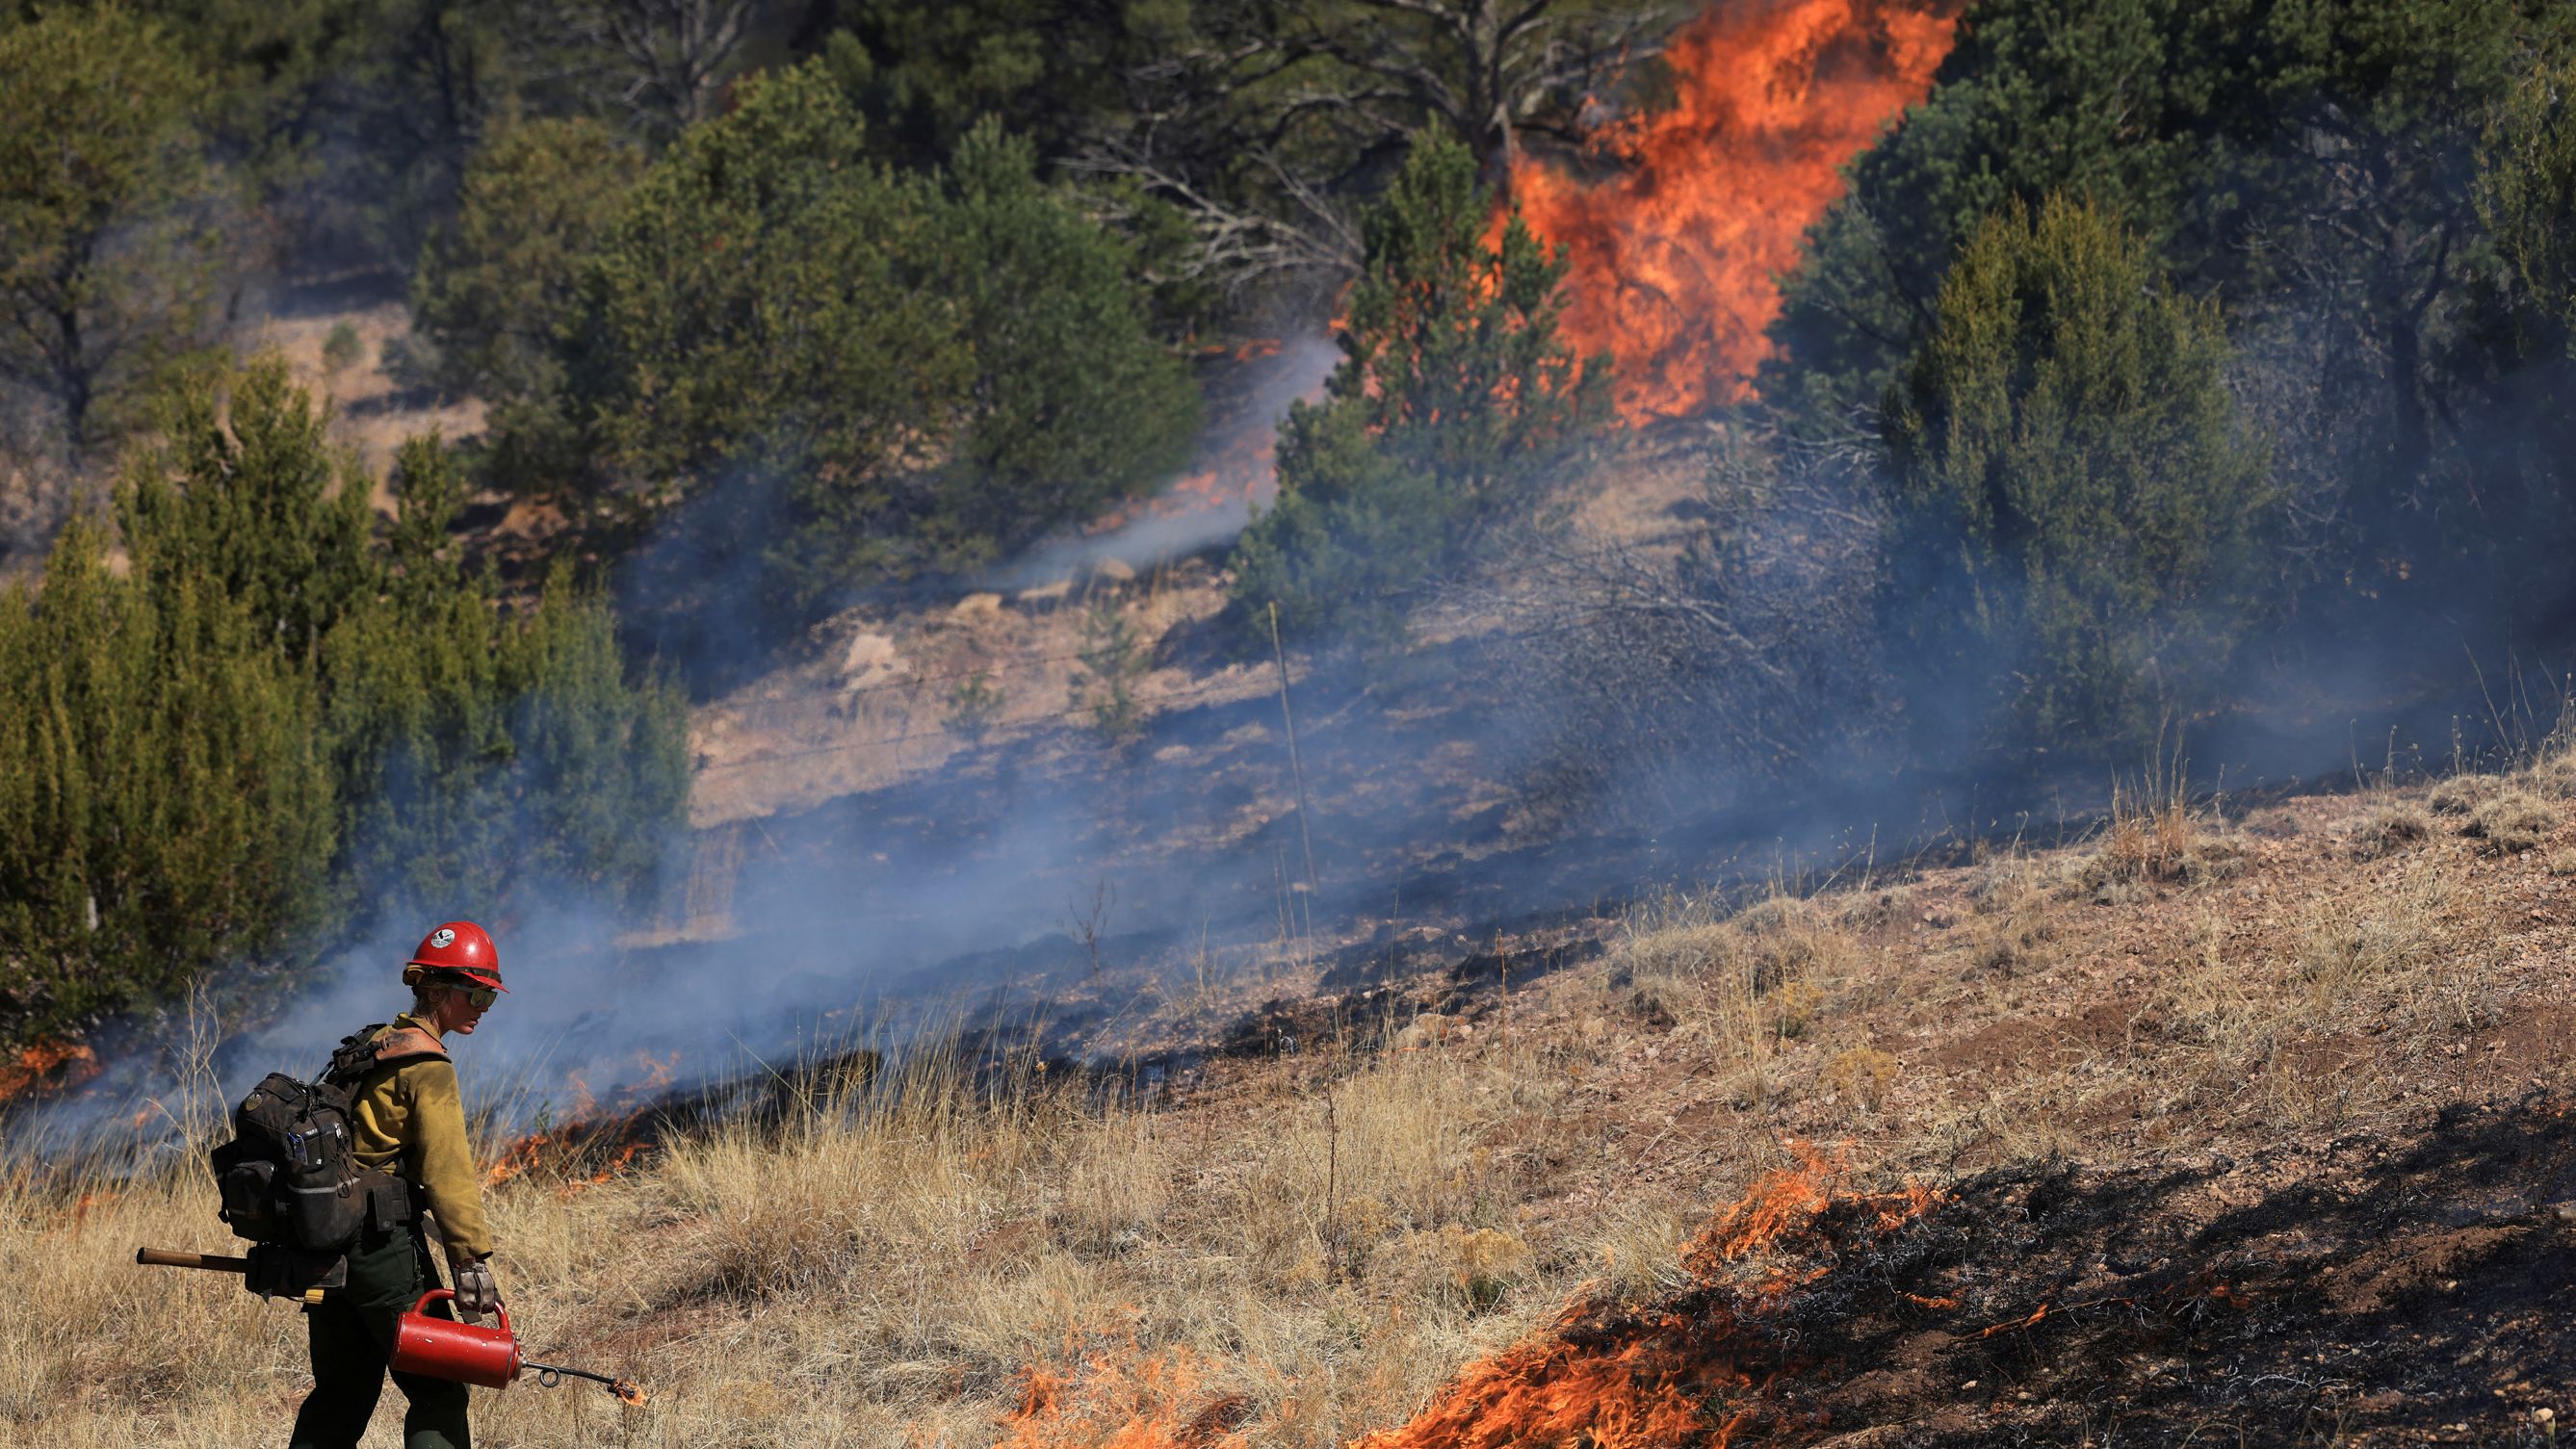 A firefighter conducts a prescribed burn Wednesday to combat the Hermits Peak/Calf Canyon Fire.